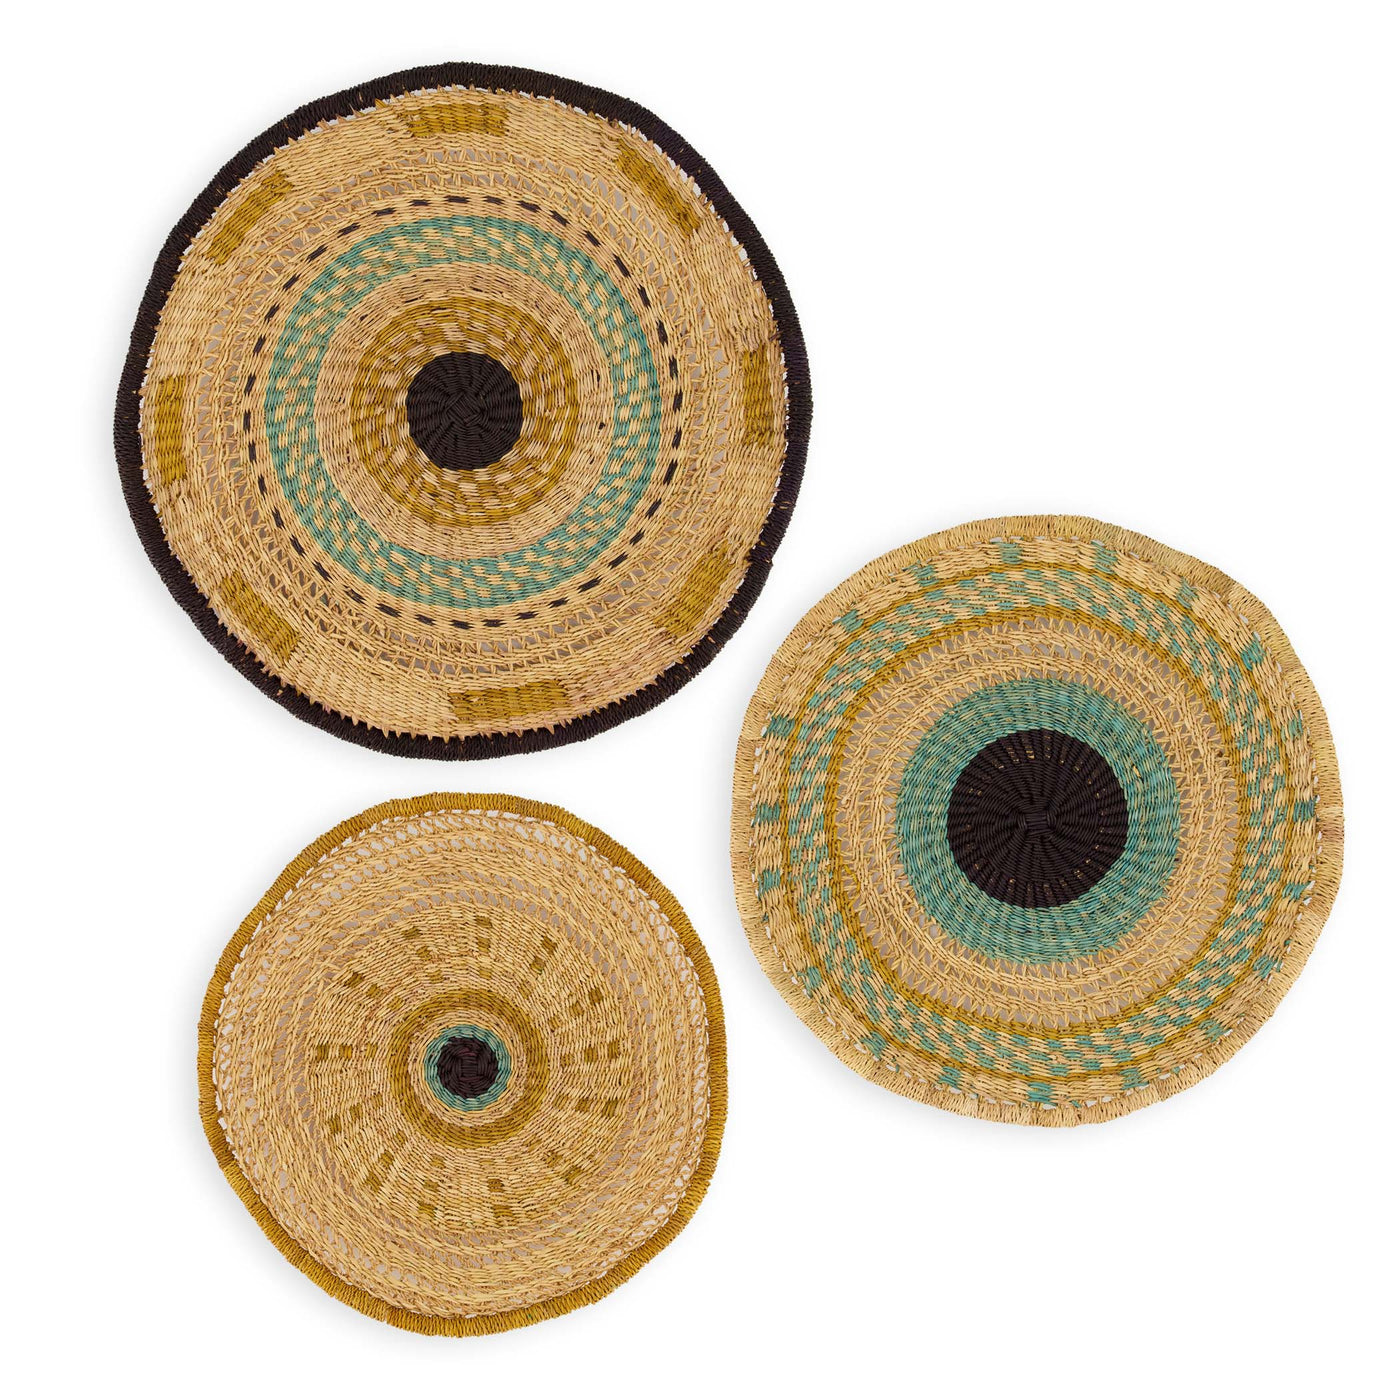 kazi town square wall plate set 16" 14" 12" cobblestone of teal turquoise and natural elephant grass